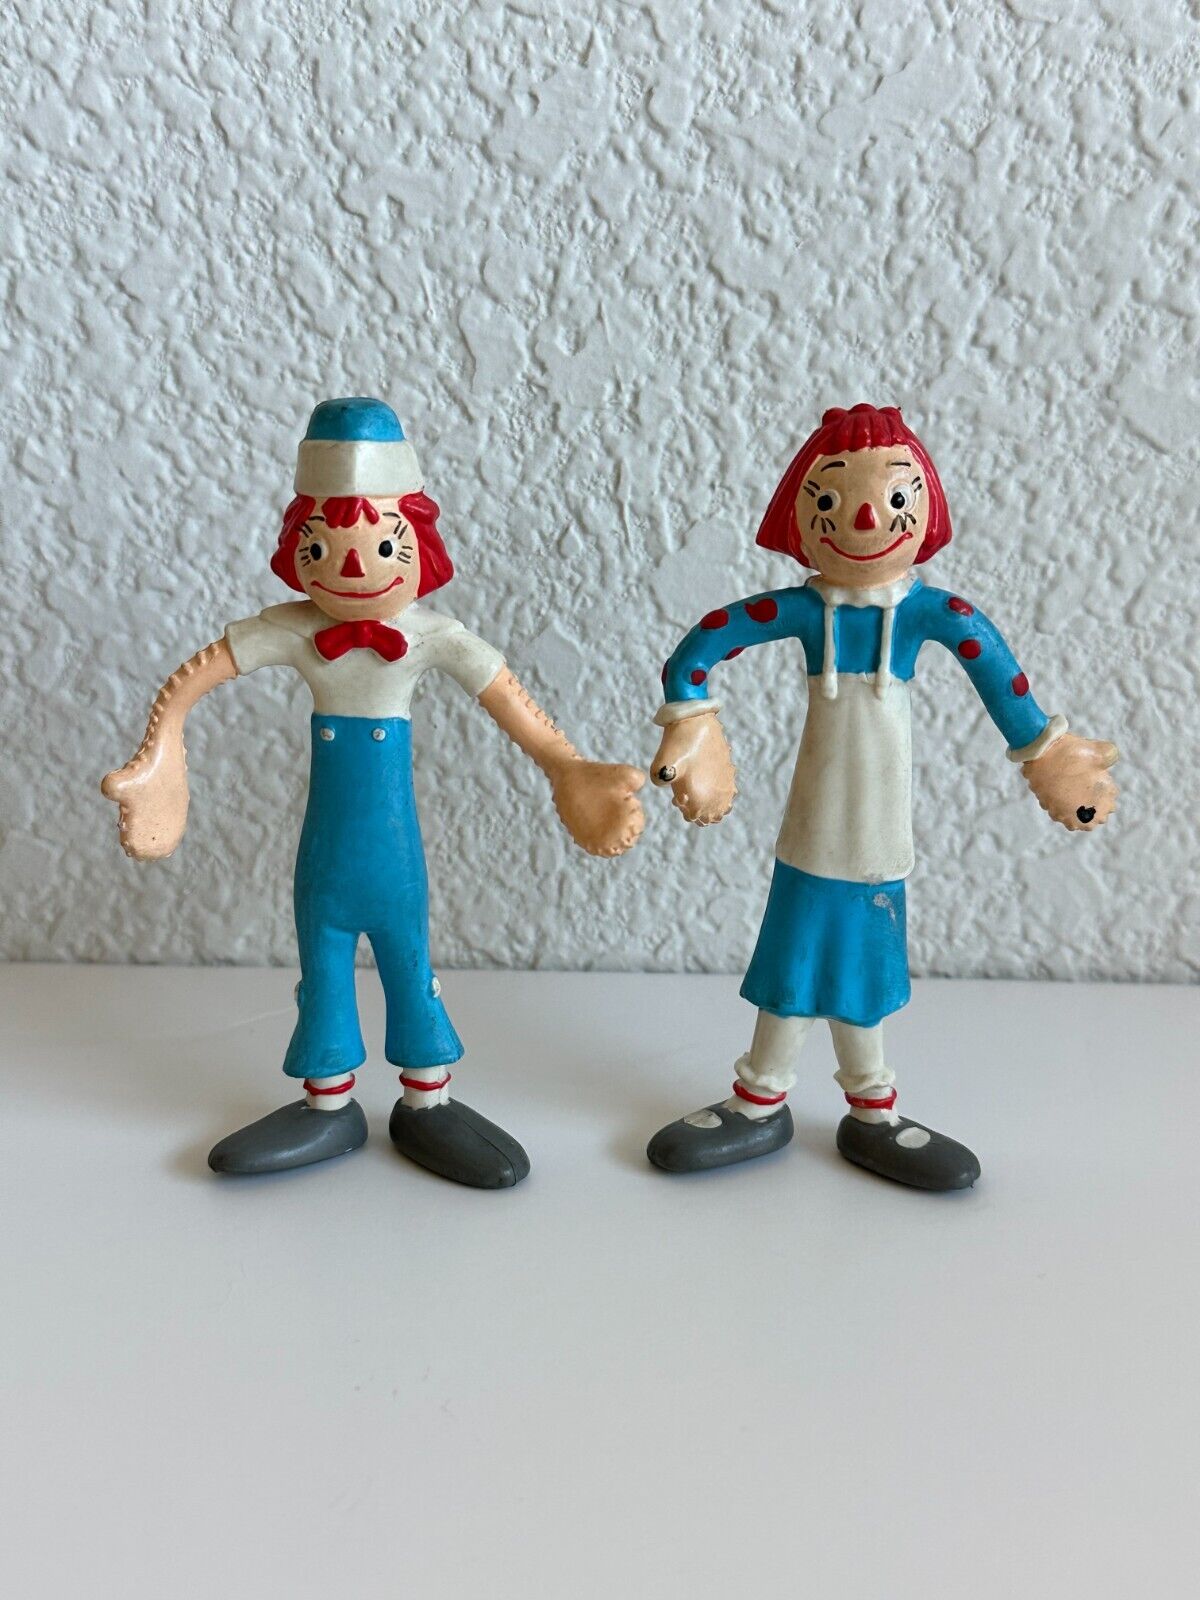 Raggedy Ann & Andy Bendable Rubber Figurines 1978 Bobbs Merrill Collectible Toy